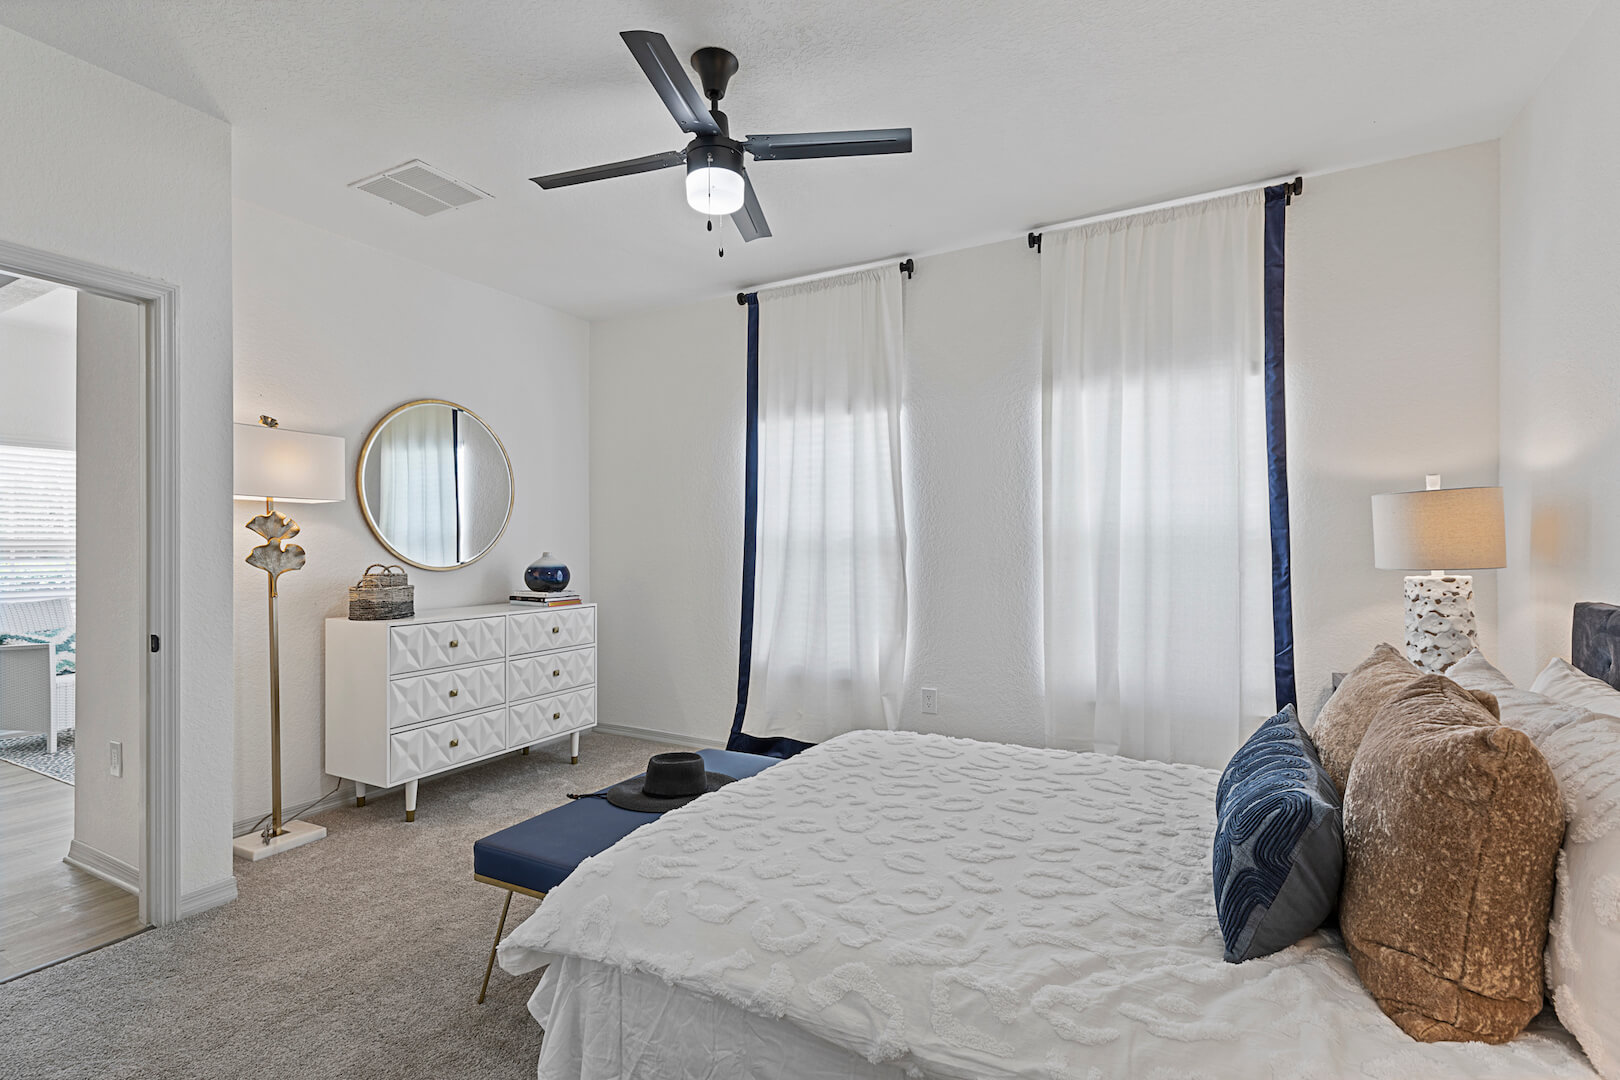 model bedroom with modern furniture, ceiling fan and carpet